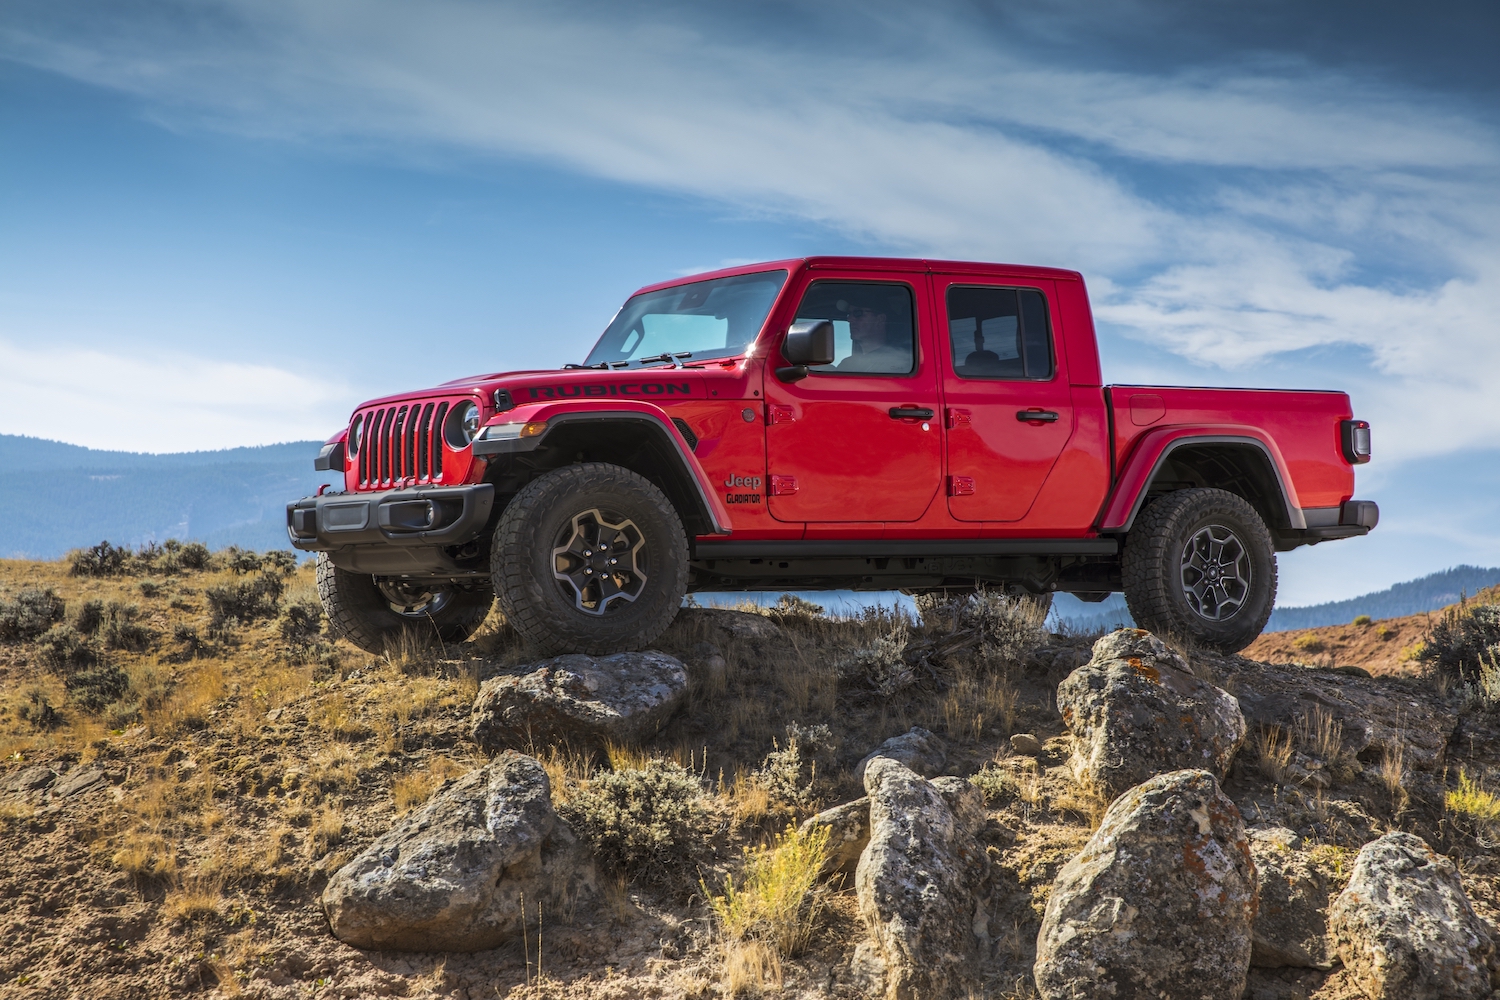 A red 2021 Jeep Gladiator, the Gladiator is one of the highest-quality trucks according to JD Power